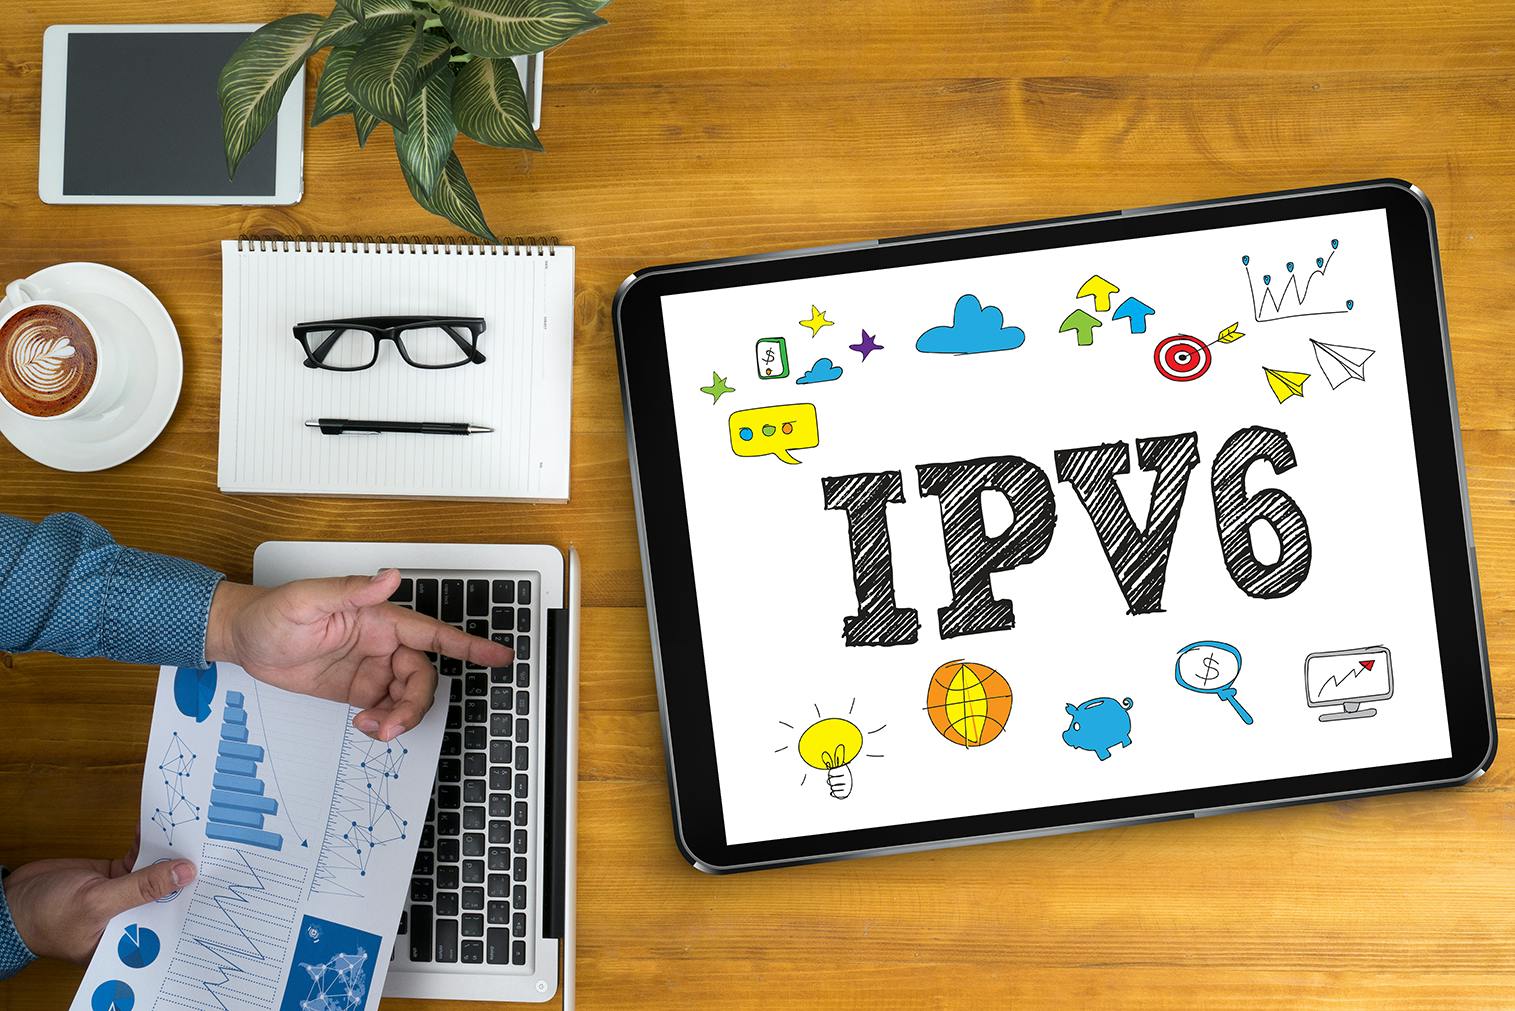 The adoption of IPv6 throughout the internet goes slow, but it makes progress. One significant change was when AWS started charging for in-use IPv4 ad